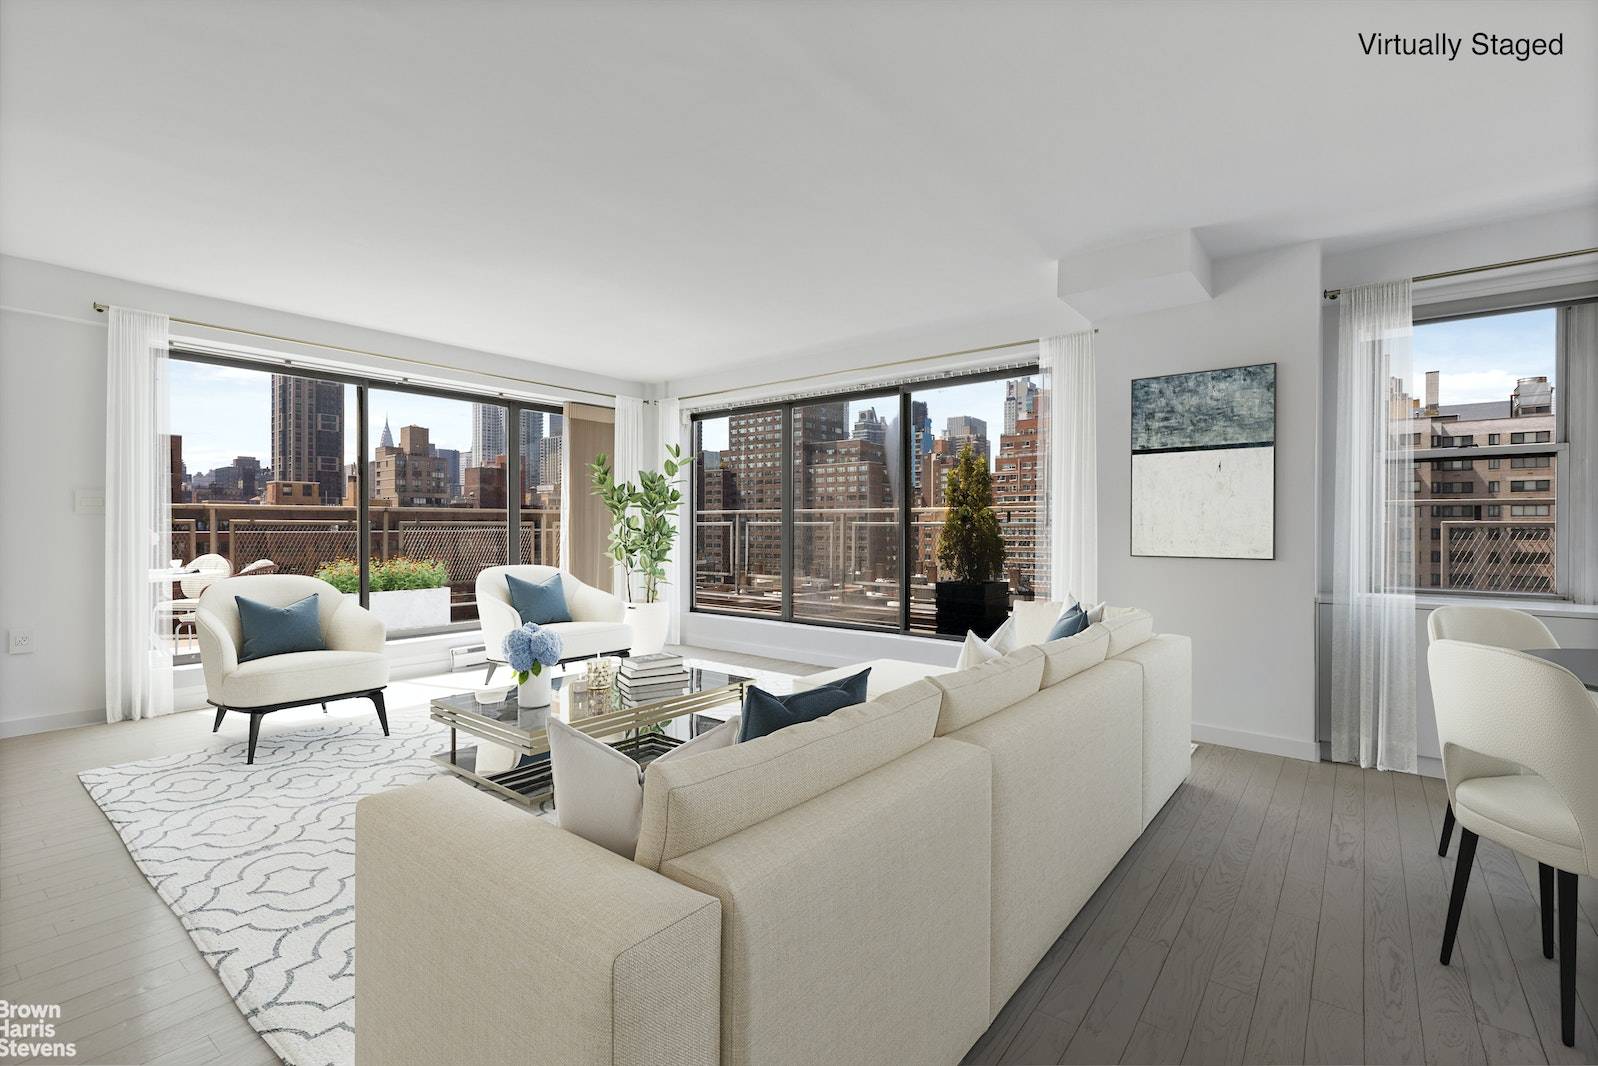 NEW LISTING ! PENTHOUSE LIVING AT ITS FINEST WITH WRAP TERRACE, LIGHT AND VIEWS TO MATCH !